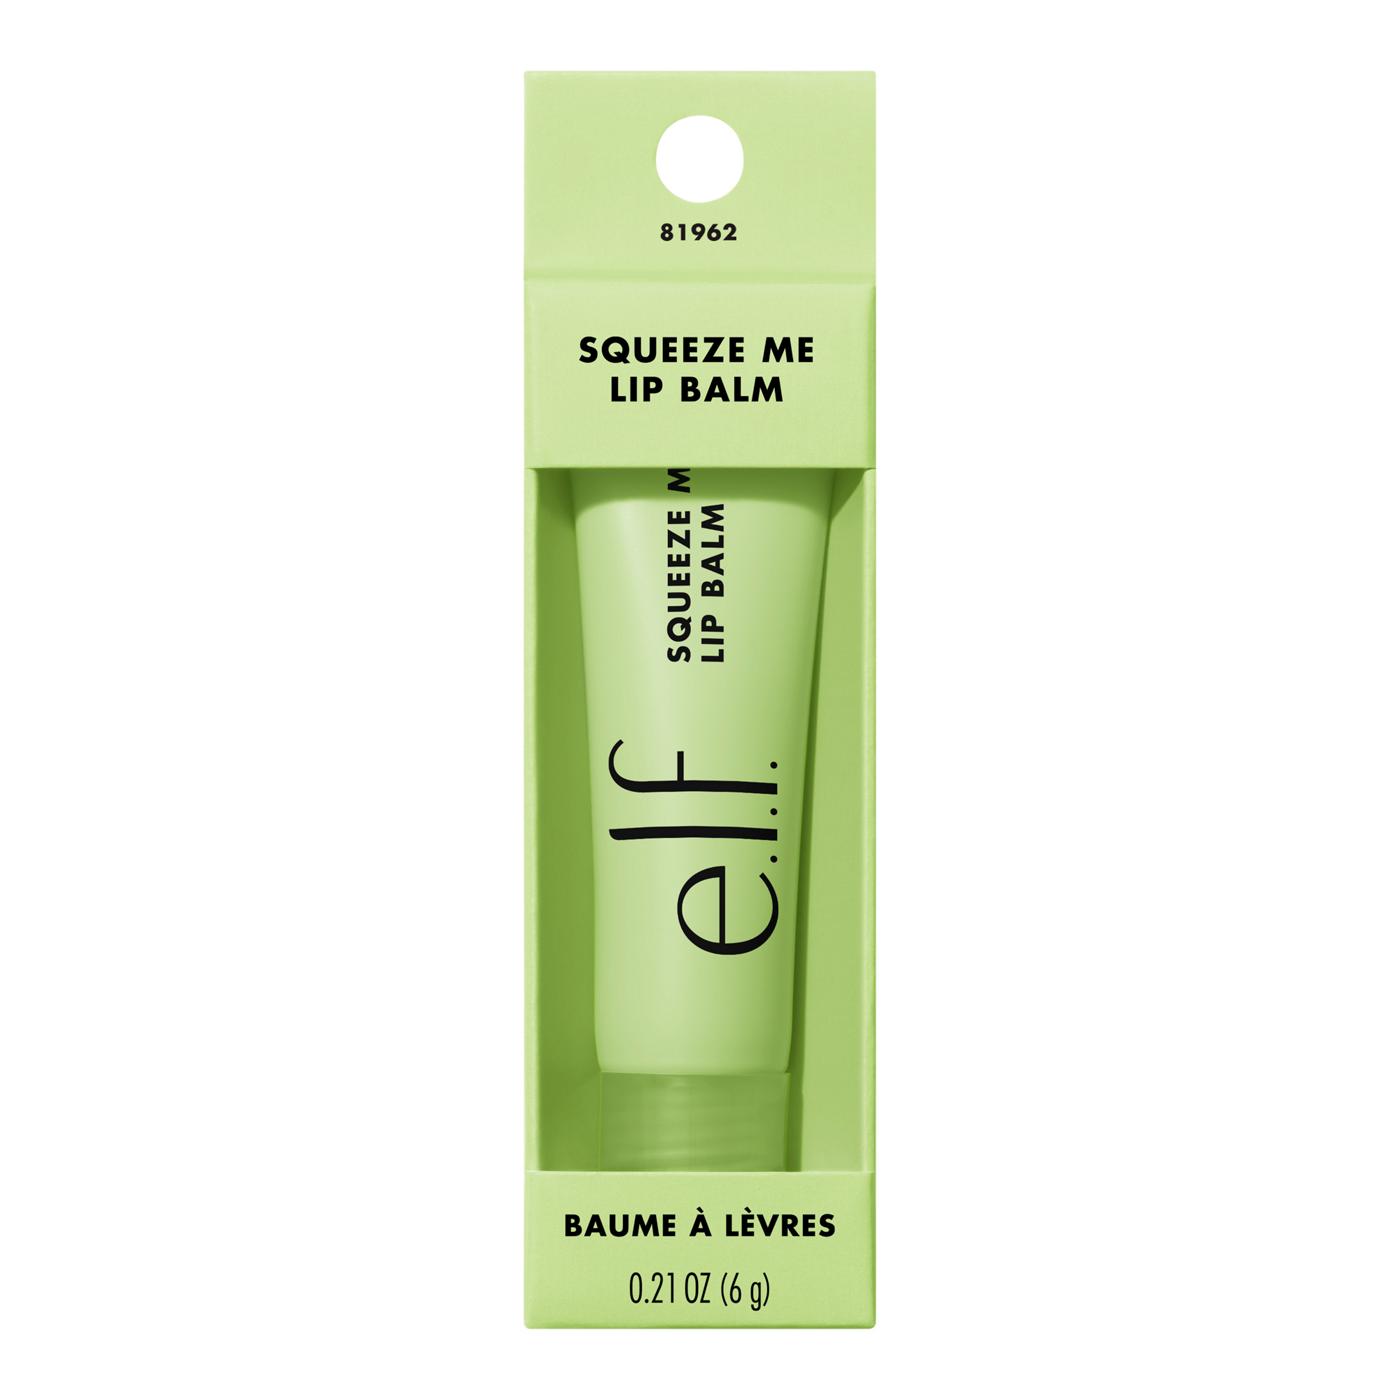 e.l.f. Squeeze Me Lip Balm - Honeydew; image 1 of 2